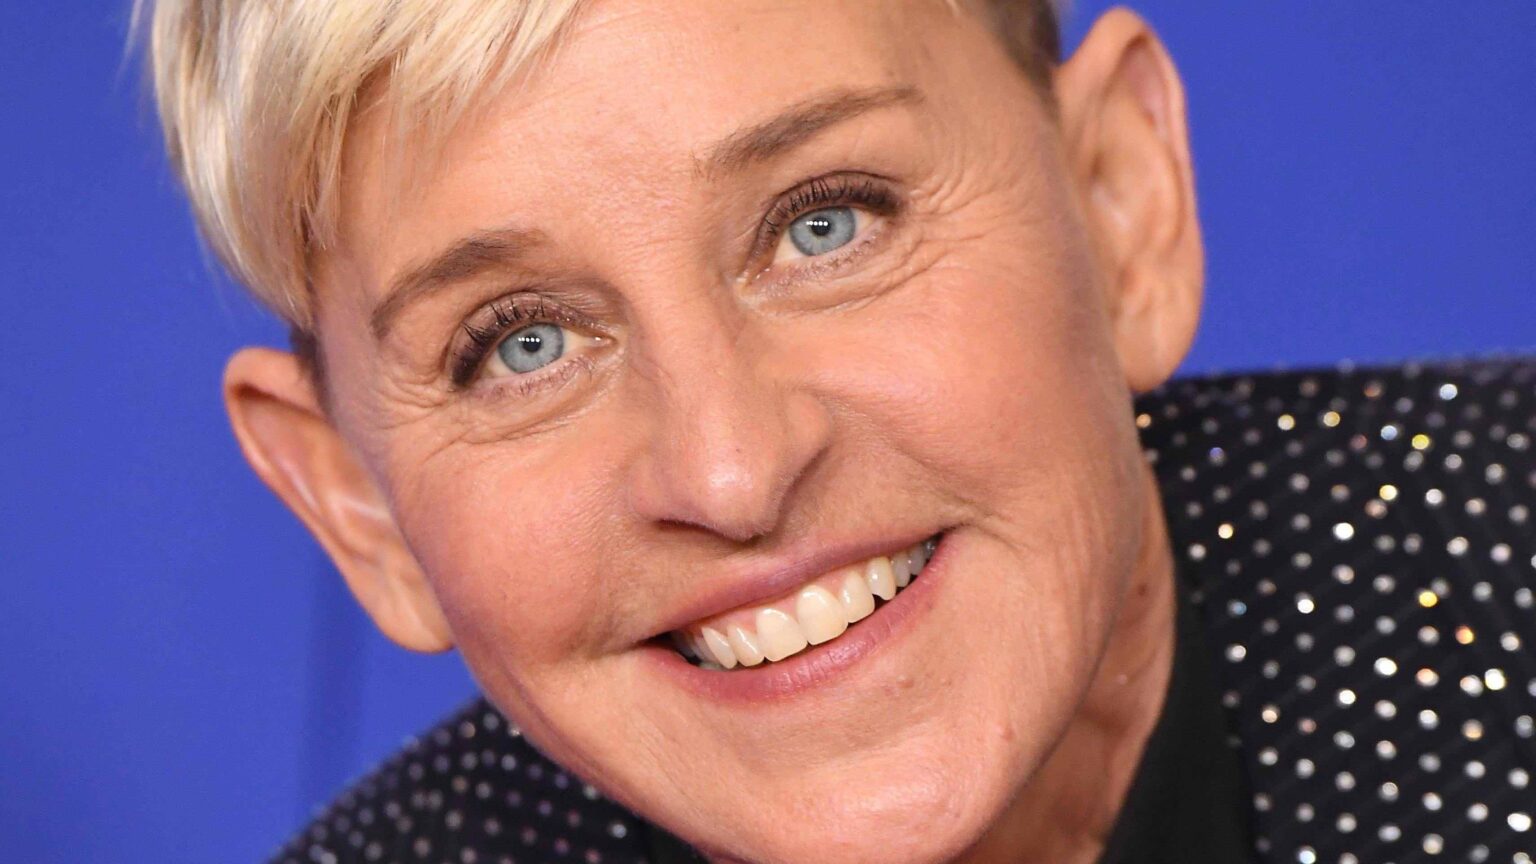 While 'The Ellen DeGeneres Show' faces down this scandal, here’s the latest on the show’s workplace harassment investigation.